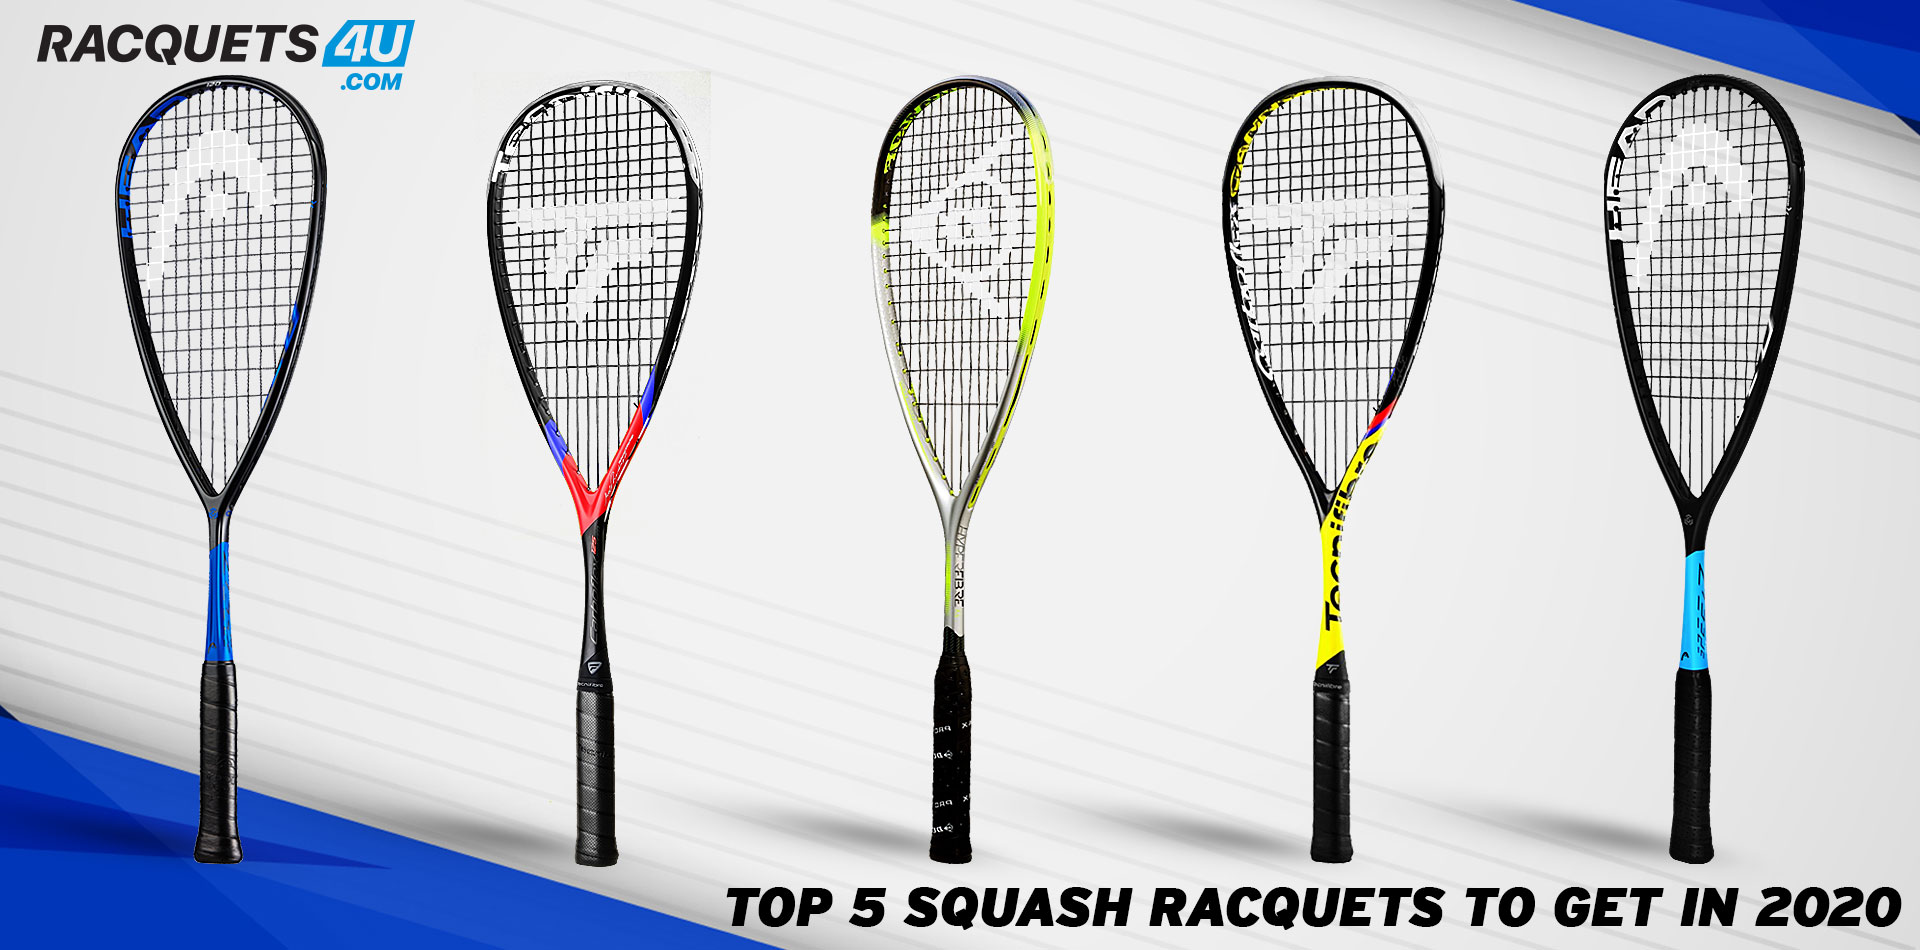 Top 5 Squash Racquets to get in 2020